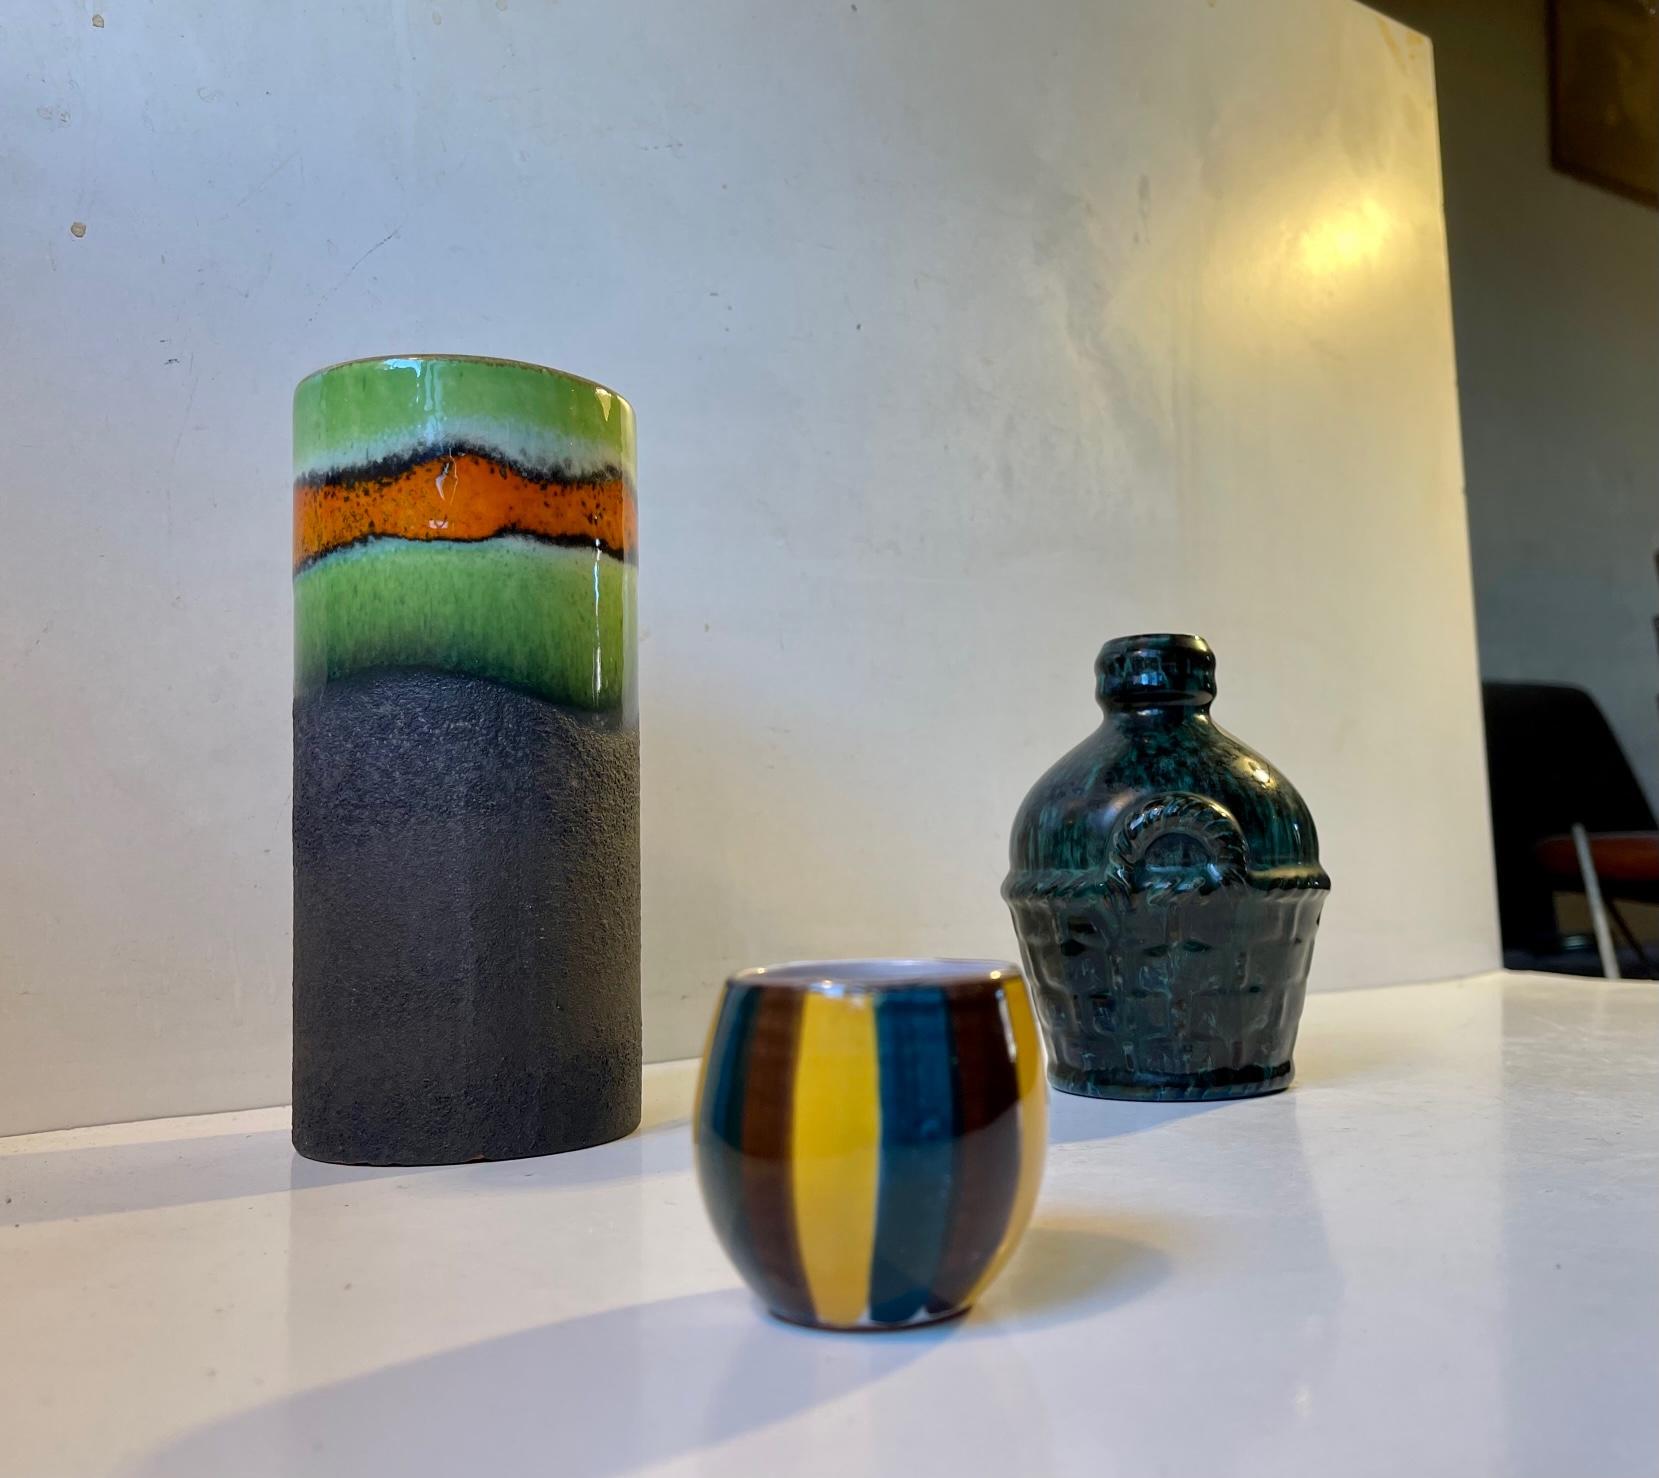 Mixed/curated group of 3 Scandinavian ceramic/stoneware pieces. A cylindrical vase with green and orange glaze, a wine-bottle shaped vase in green and black glaze and a small striped vase/cup. All studio made in Denmark/Scandinavia between 1950-80.